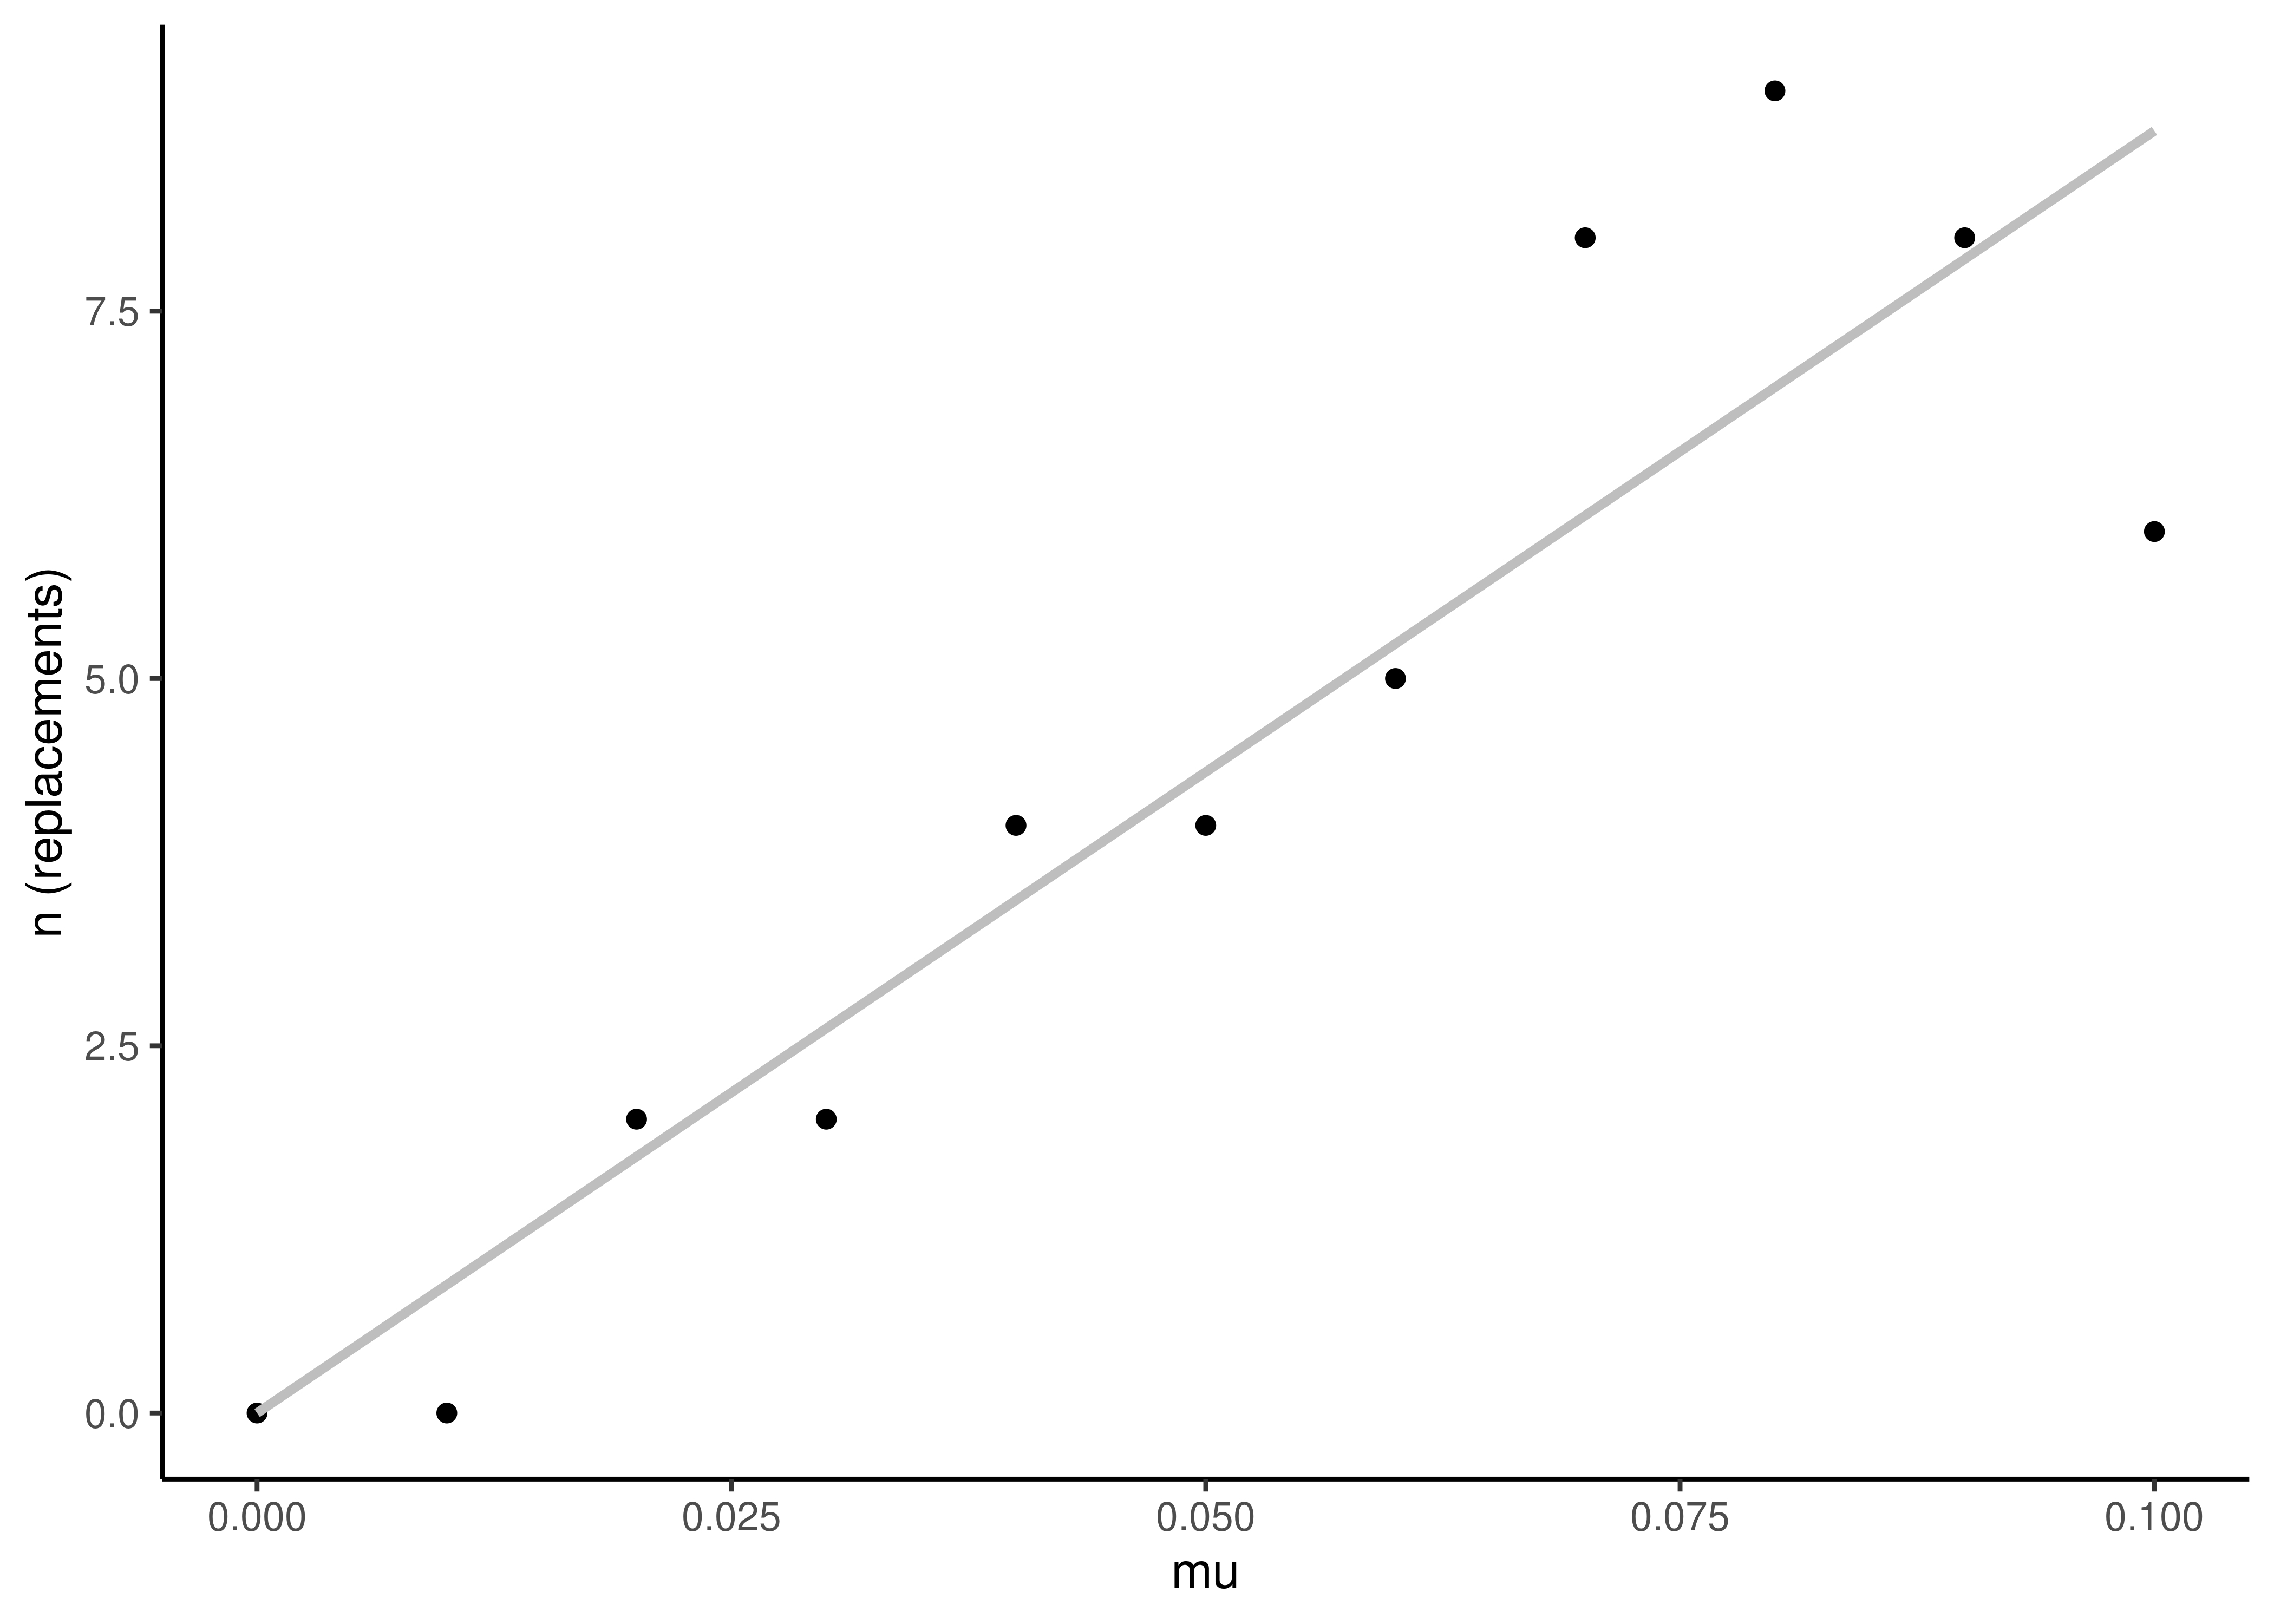 The number of replacement events increases linearly with the replacement rate $\mu$. This plot is from the same simulation as that shown in Figure \@ref(fig:sim-jc-mu-sweep). The line is a linear model fit to the data. Since $n=\mu t$, and in this case $t=100$, the slope of $n$ on $t$ is estimated to be near 100.